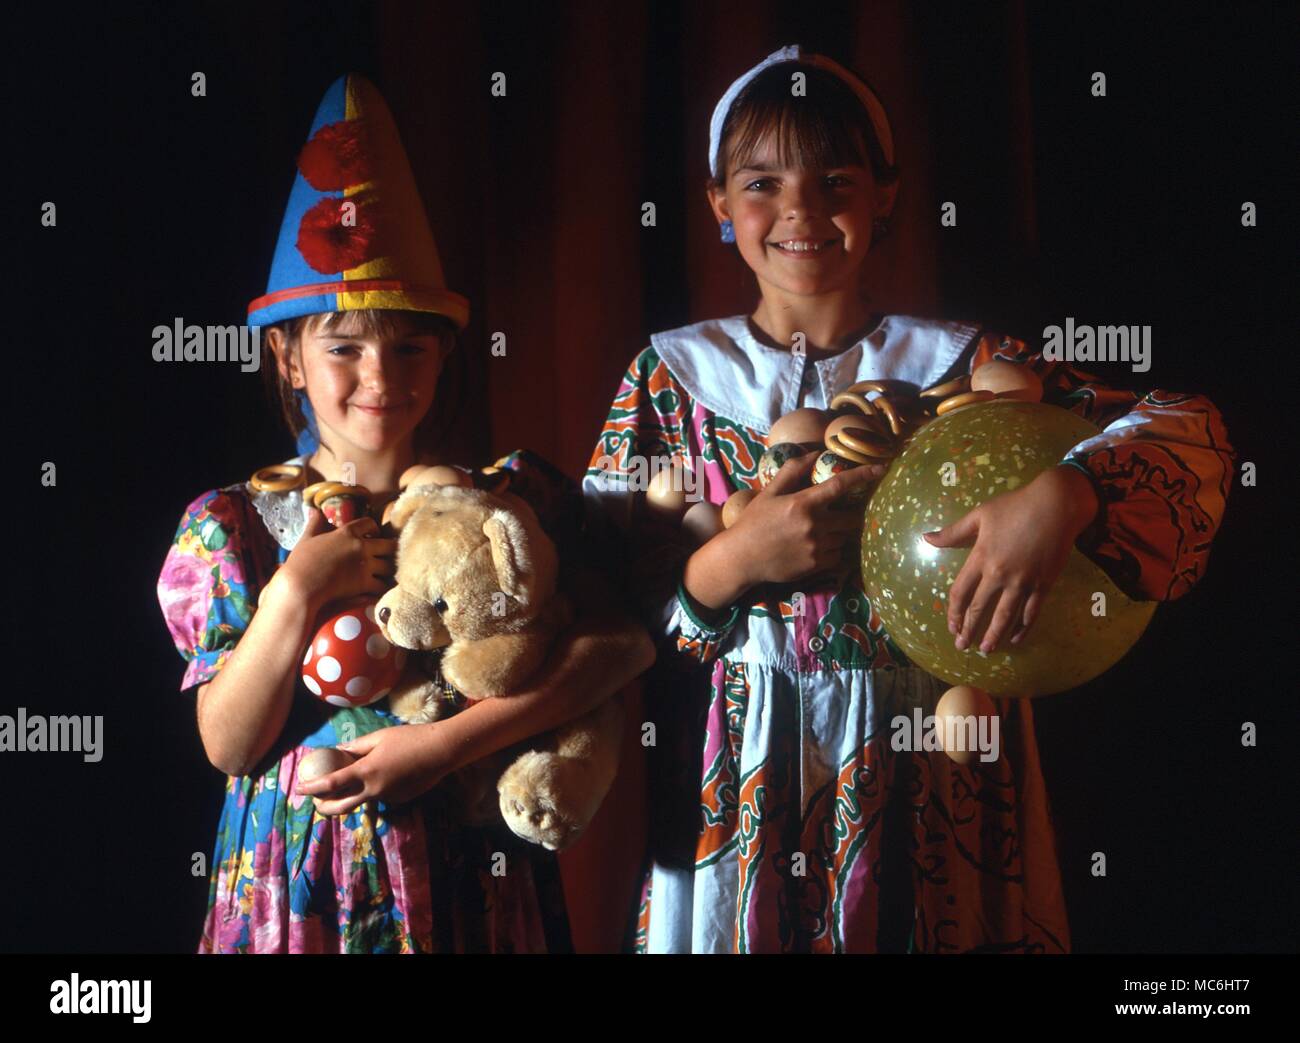 Stage Magic. The magician takes object after object from his hat, and hands them to two children. Soon, they cannot carry everything and begin to drop objects on the stage. Stock Photo